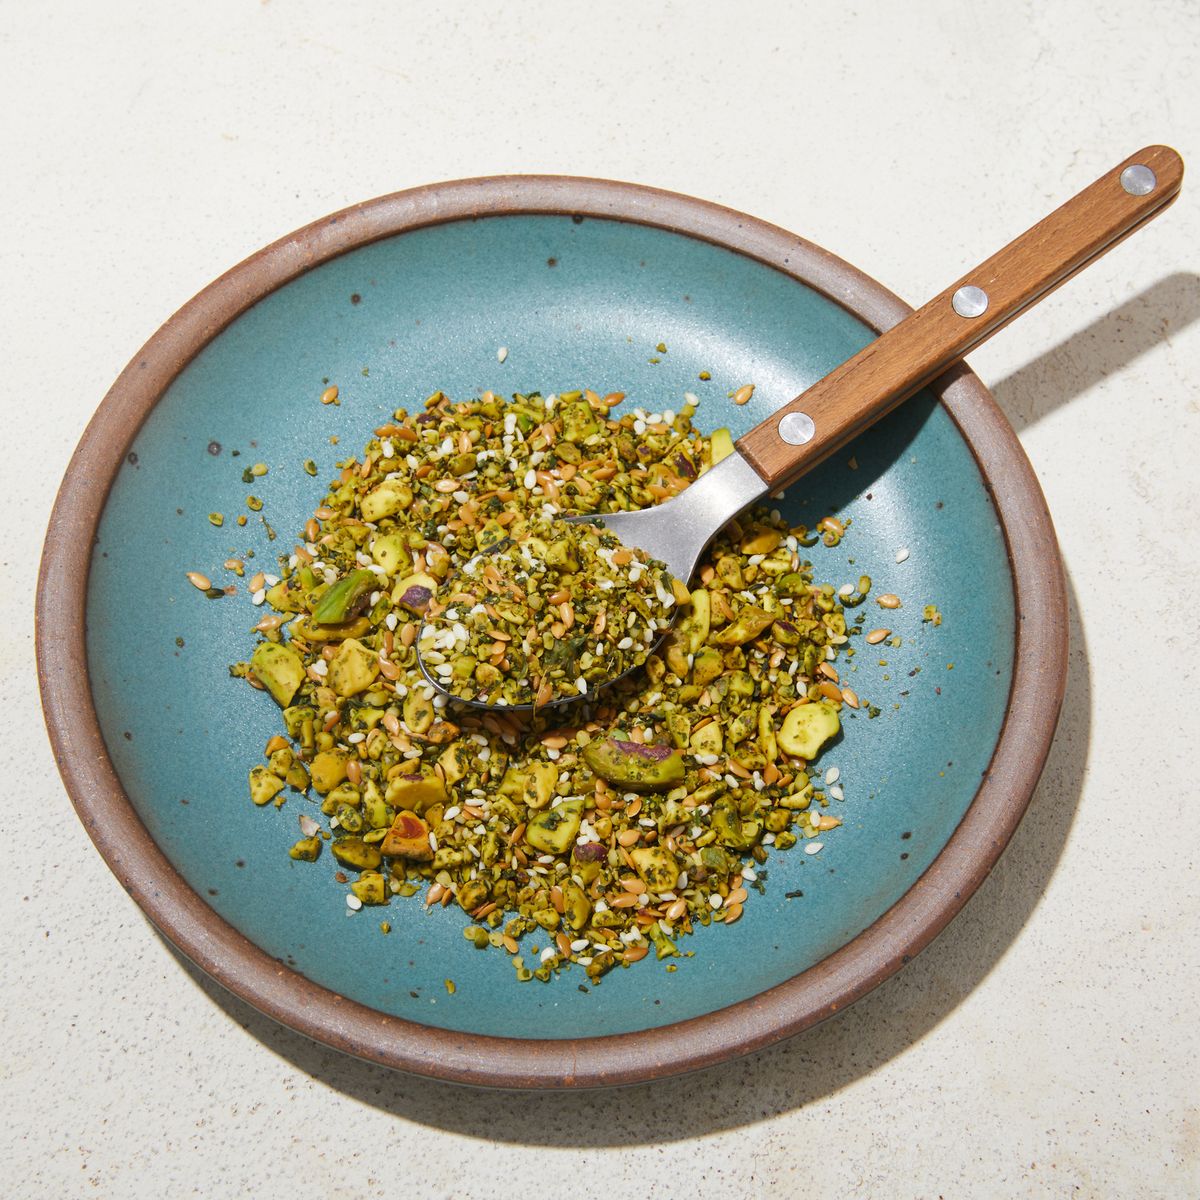 Pistachio dukkah spread over a turquoise plate with spoon resting on top